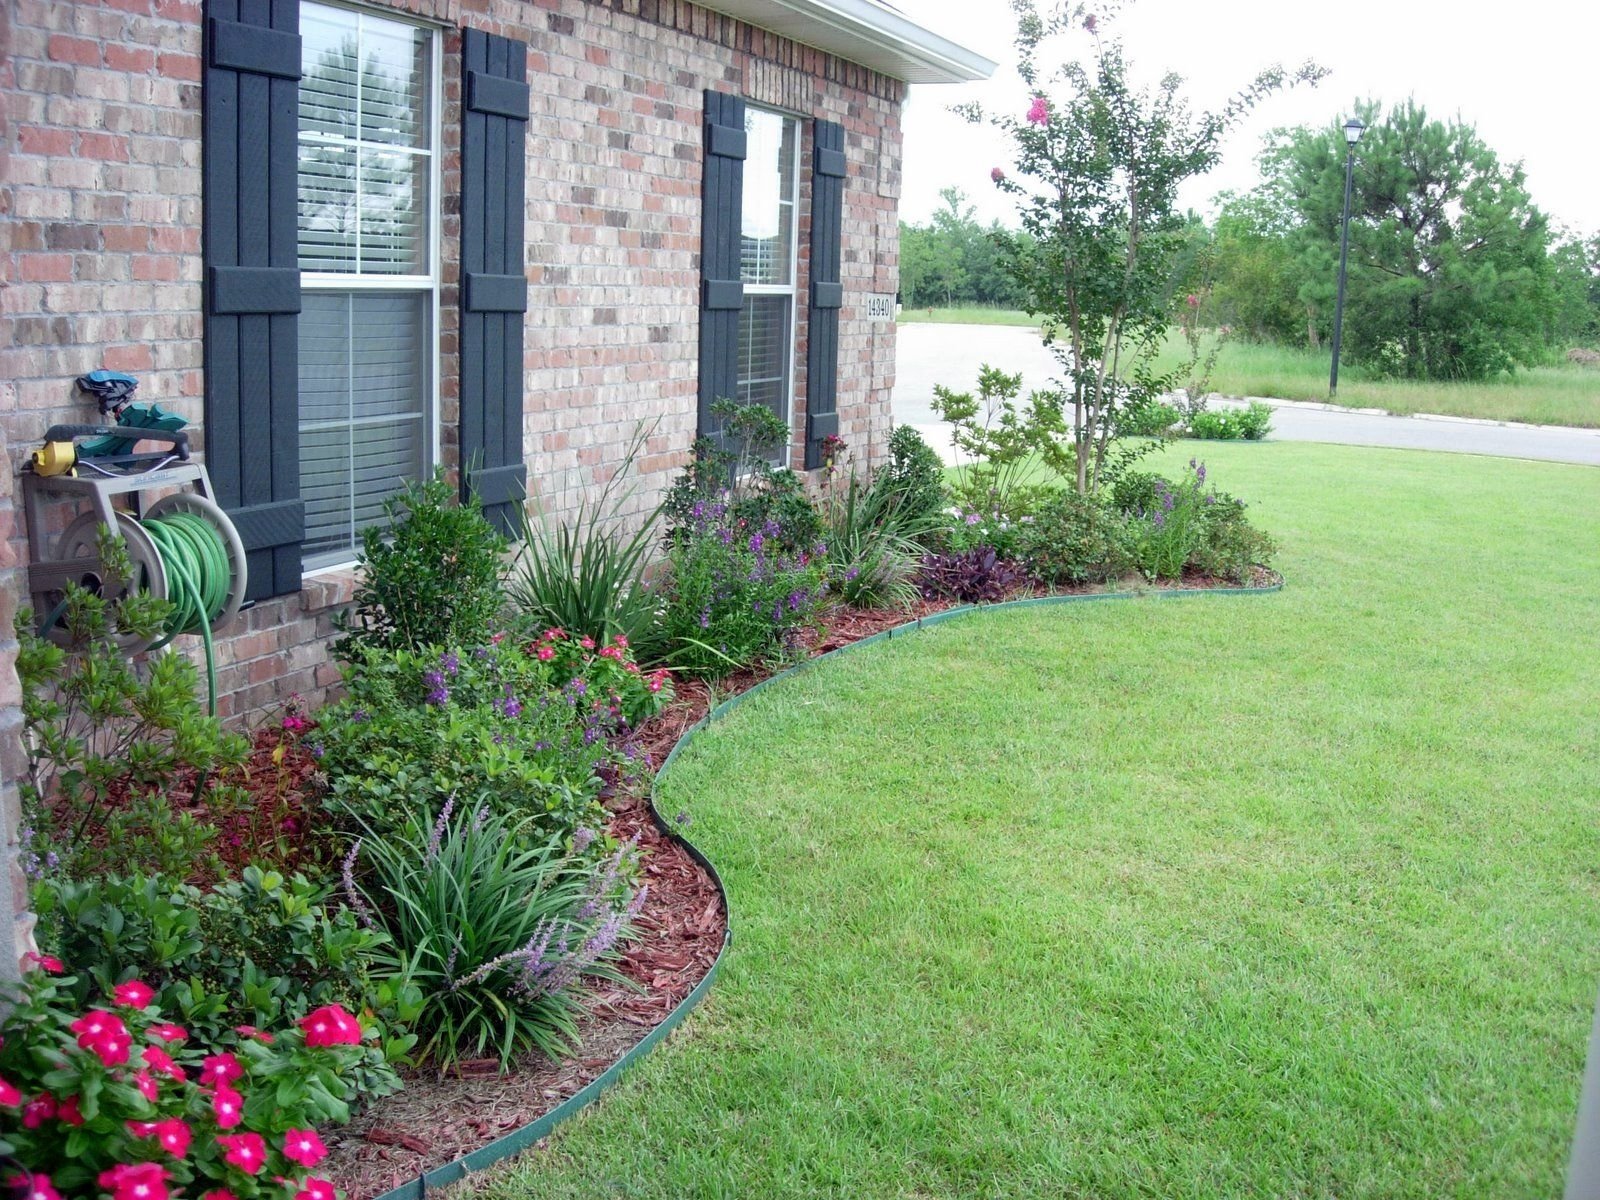 10 Stylish Small Front Yard Flower Bed Ideas flower bed designs for front of house use shrubs small trees to 2 2022